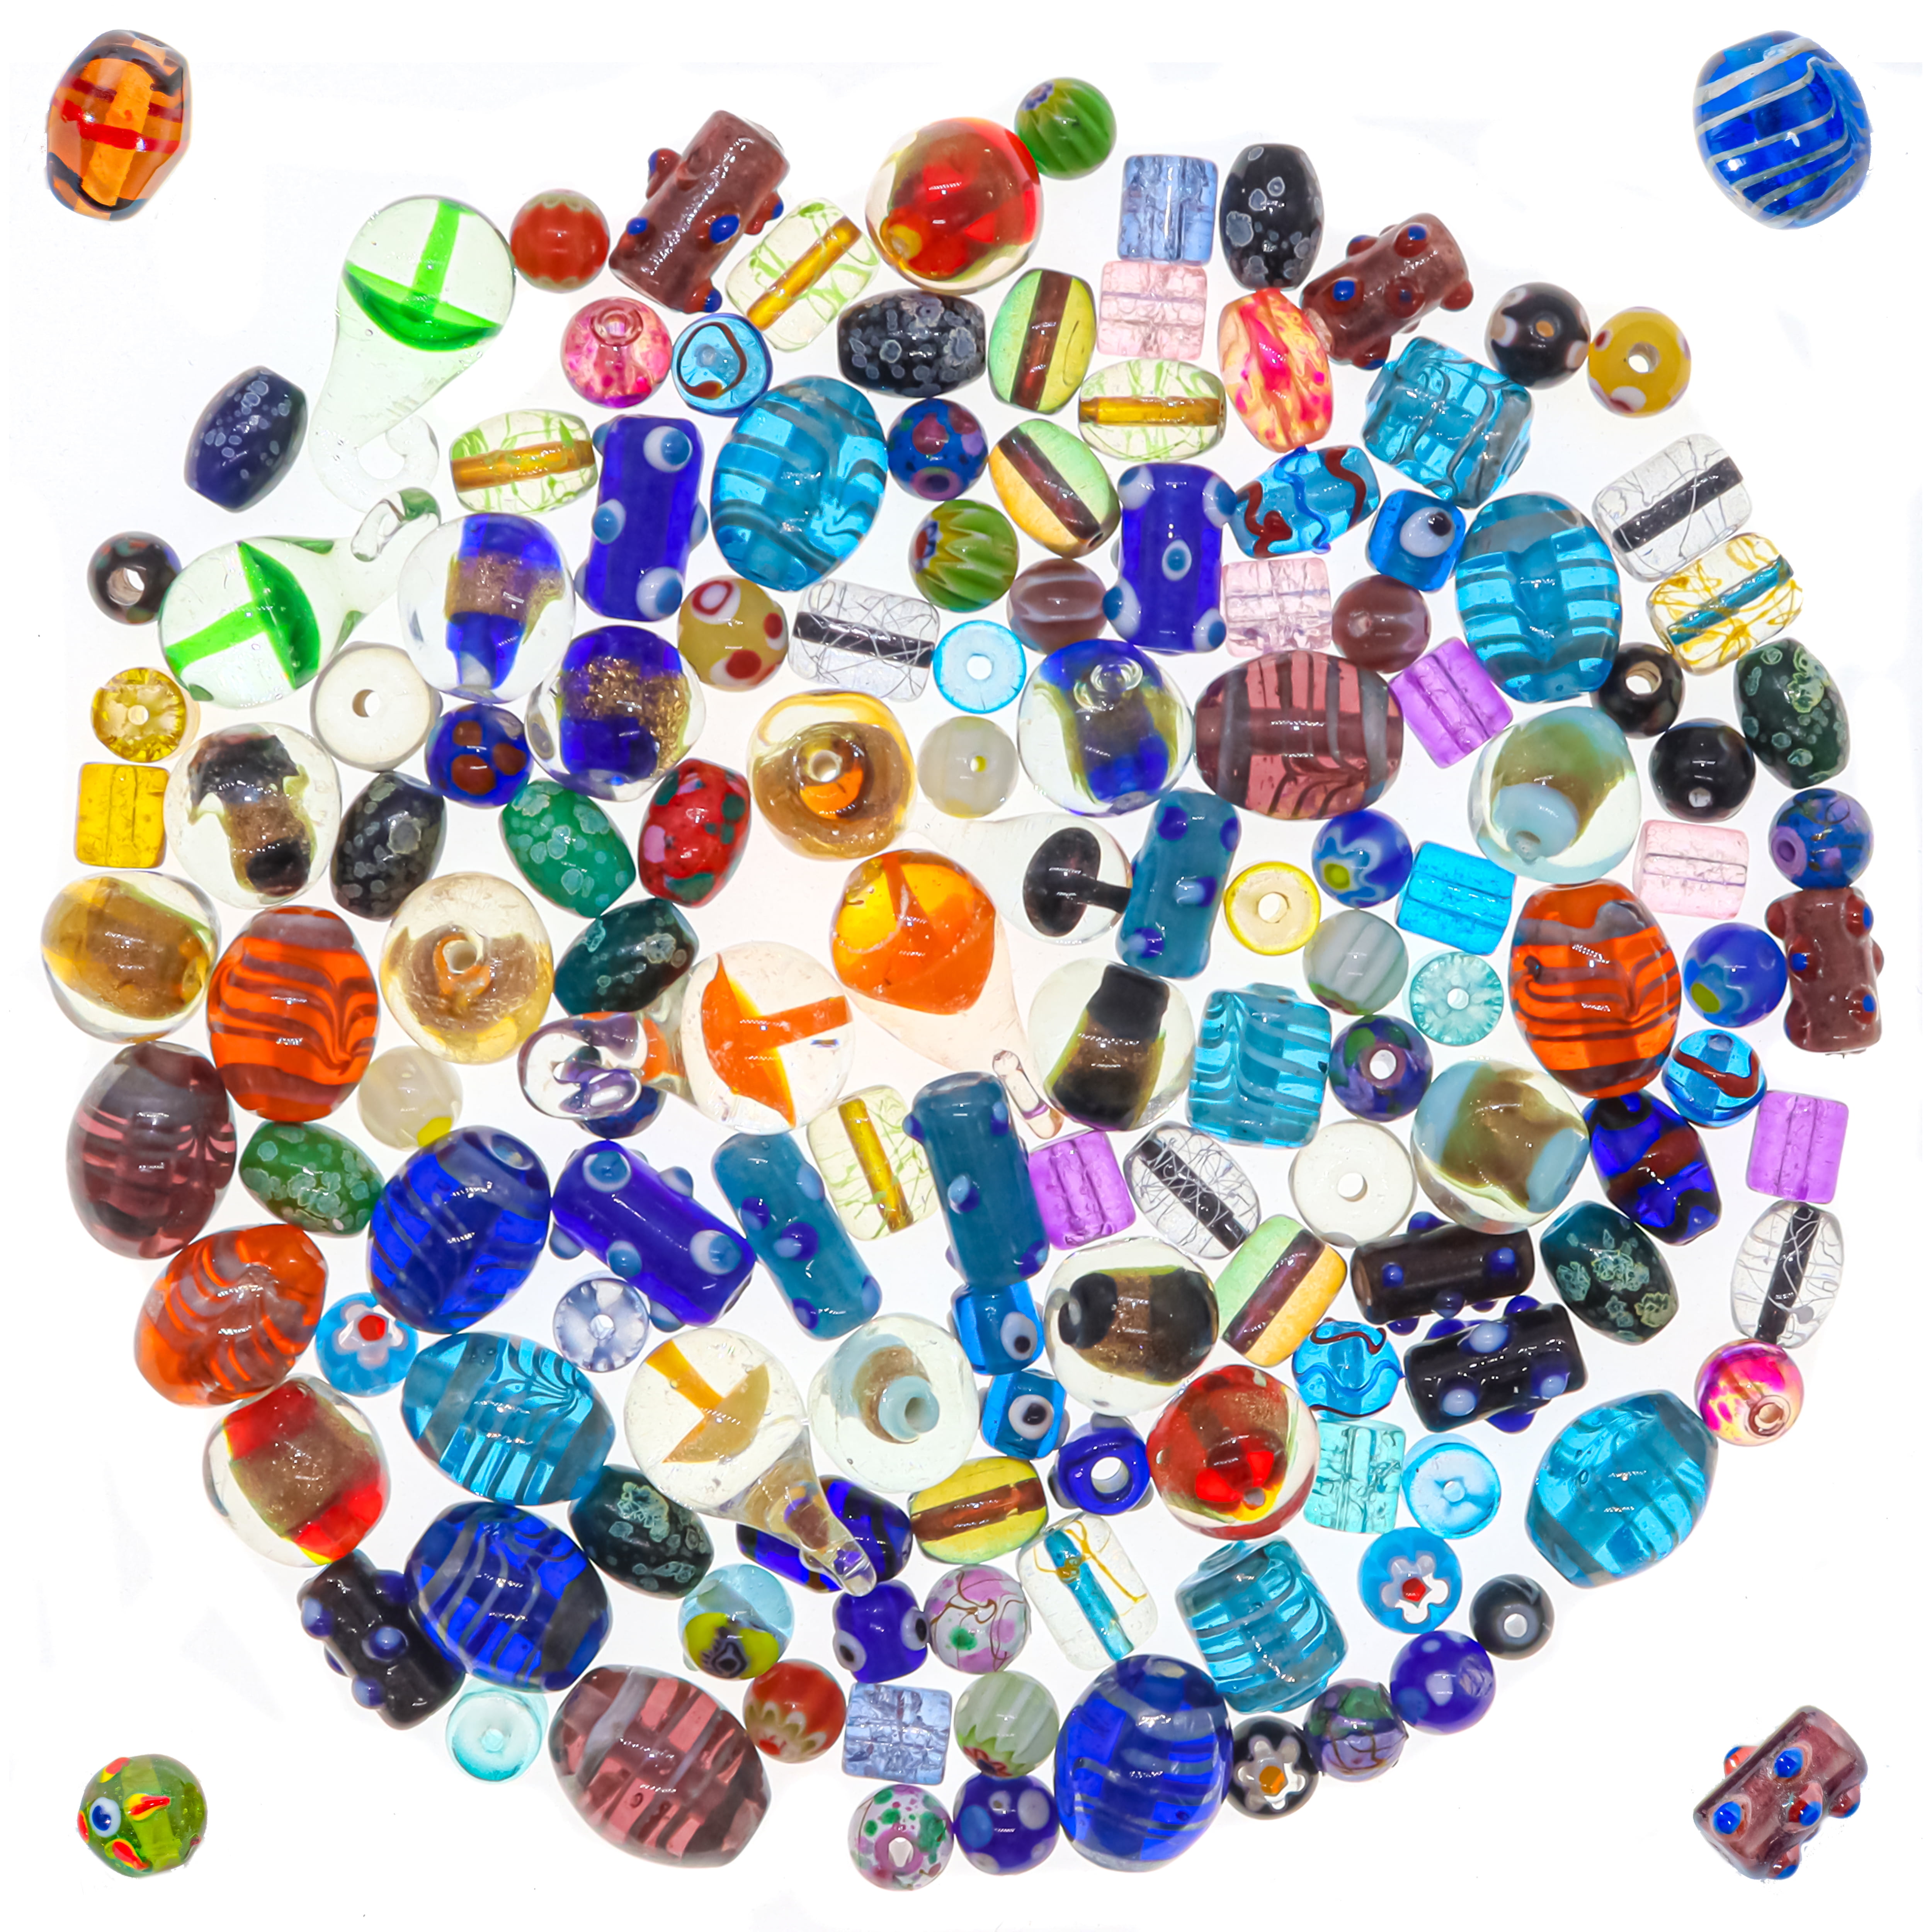 SUPPLY: 60pcs Mixed Dark Green Family Glass Beads BULK Assorted Shapes  Beads Vintage Jewelry Supplies 